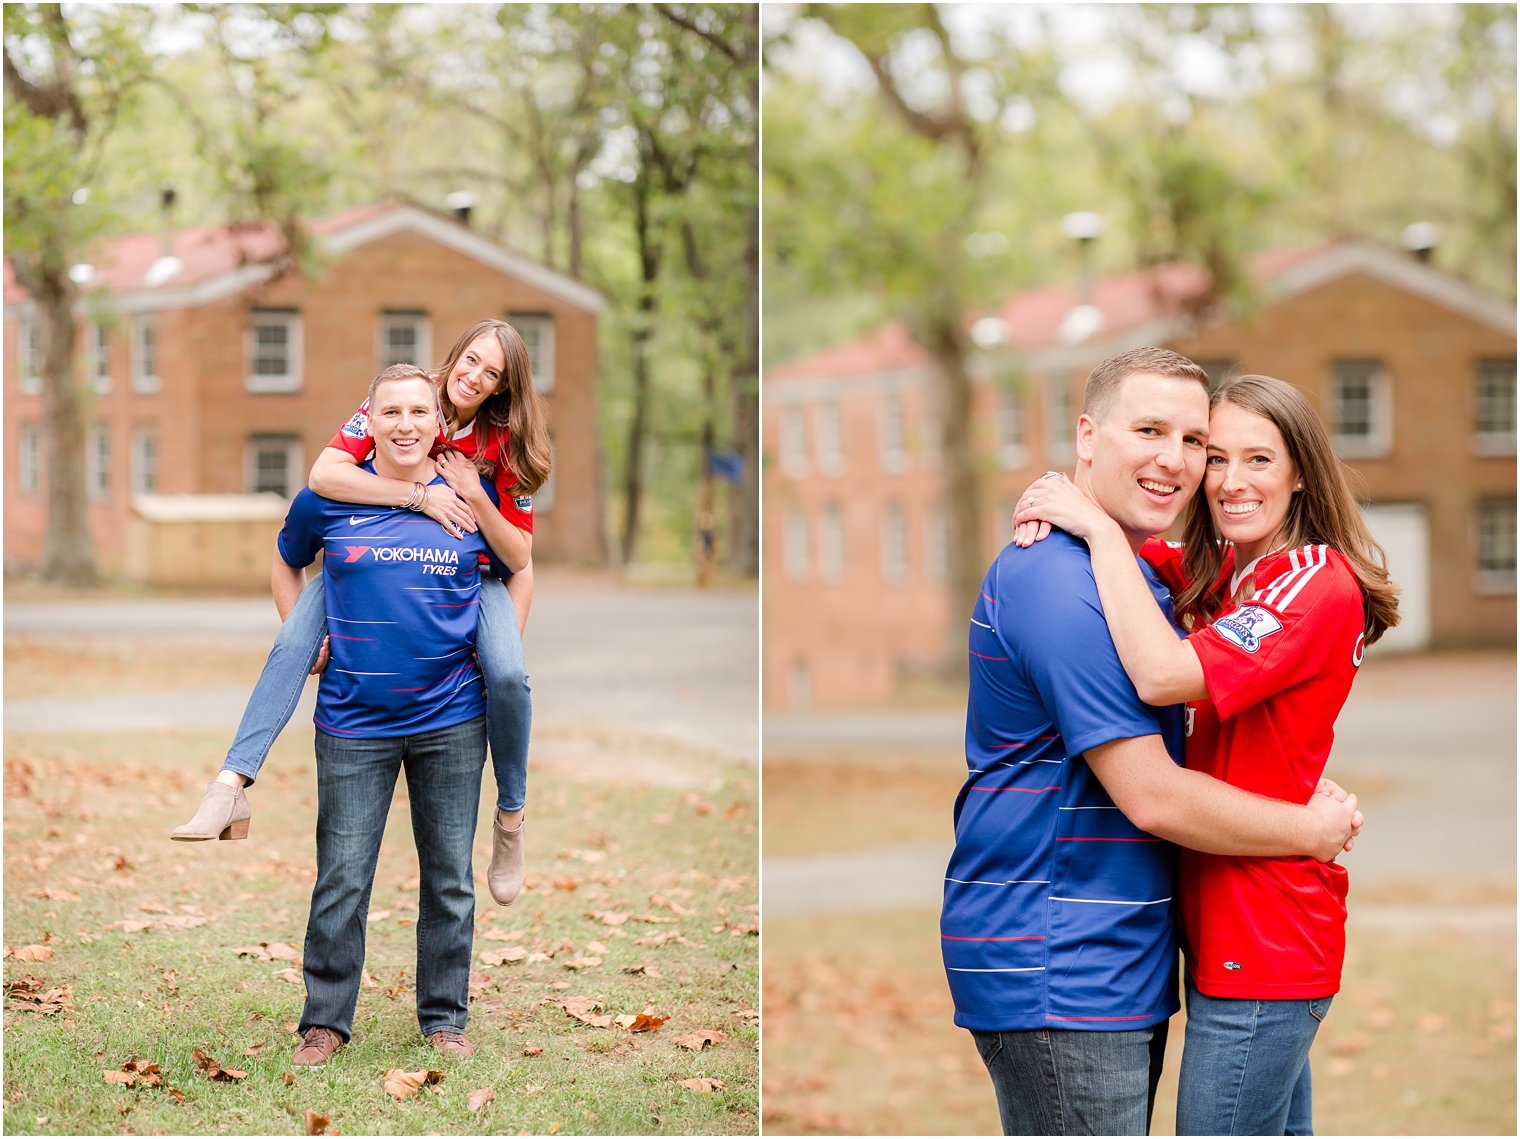 casual engagement photos in jerseys by Idalia Photography